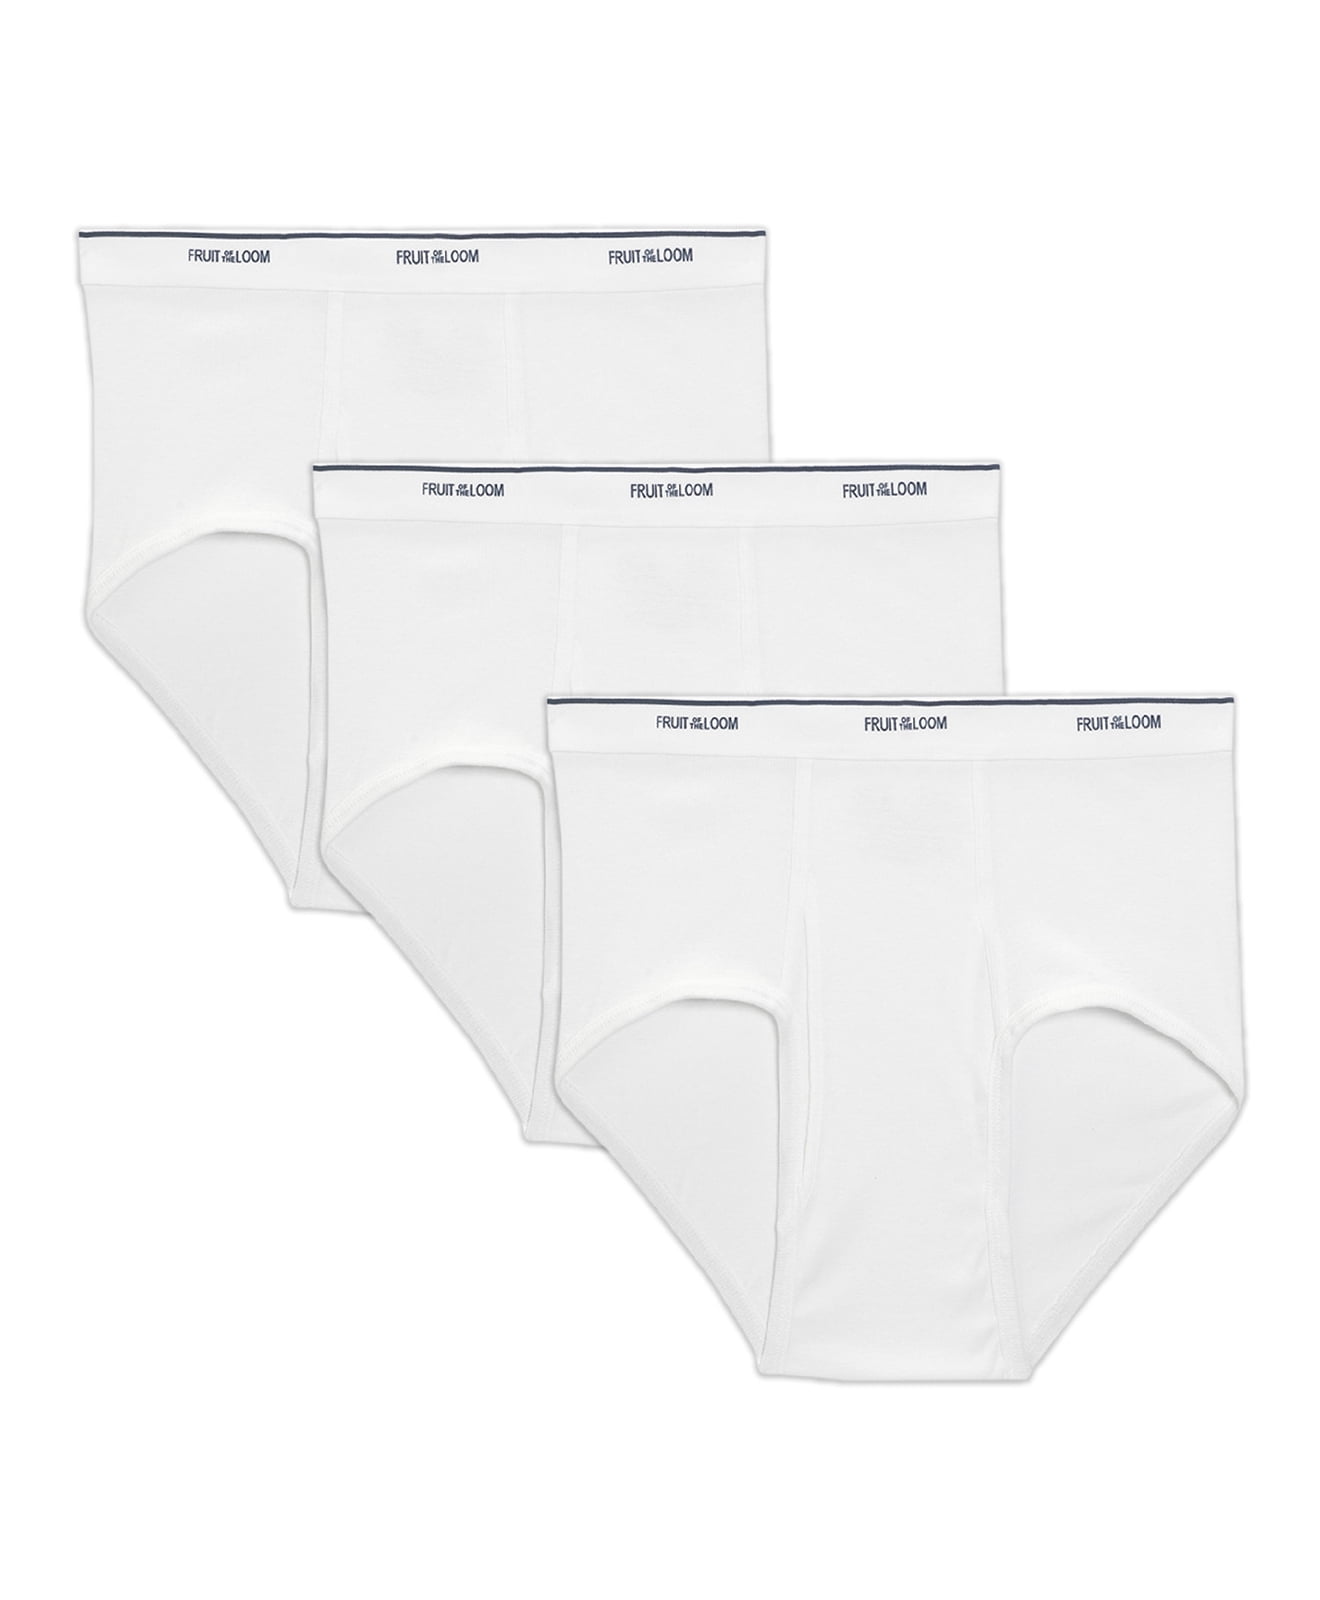 NEW Mens Fruit of The Loom Big White Briefs Size 5XB 2 Packages of 3 Pairs 